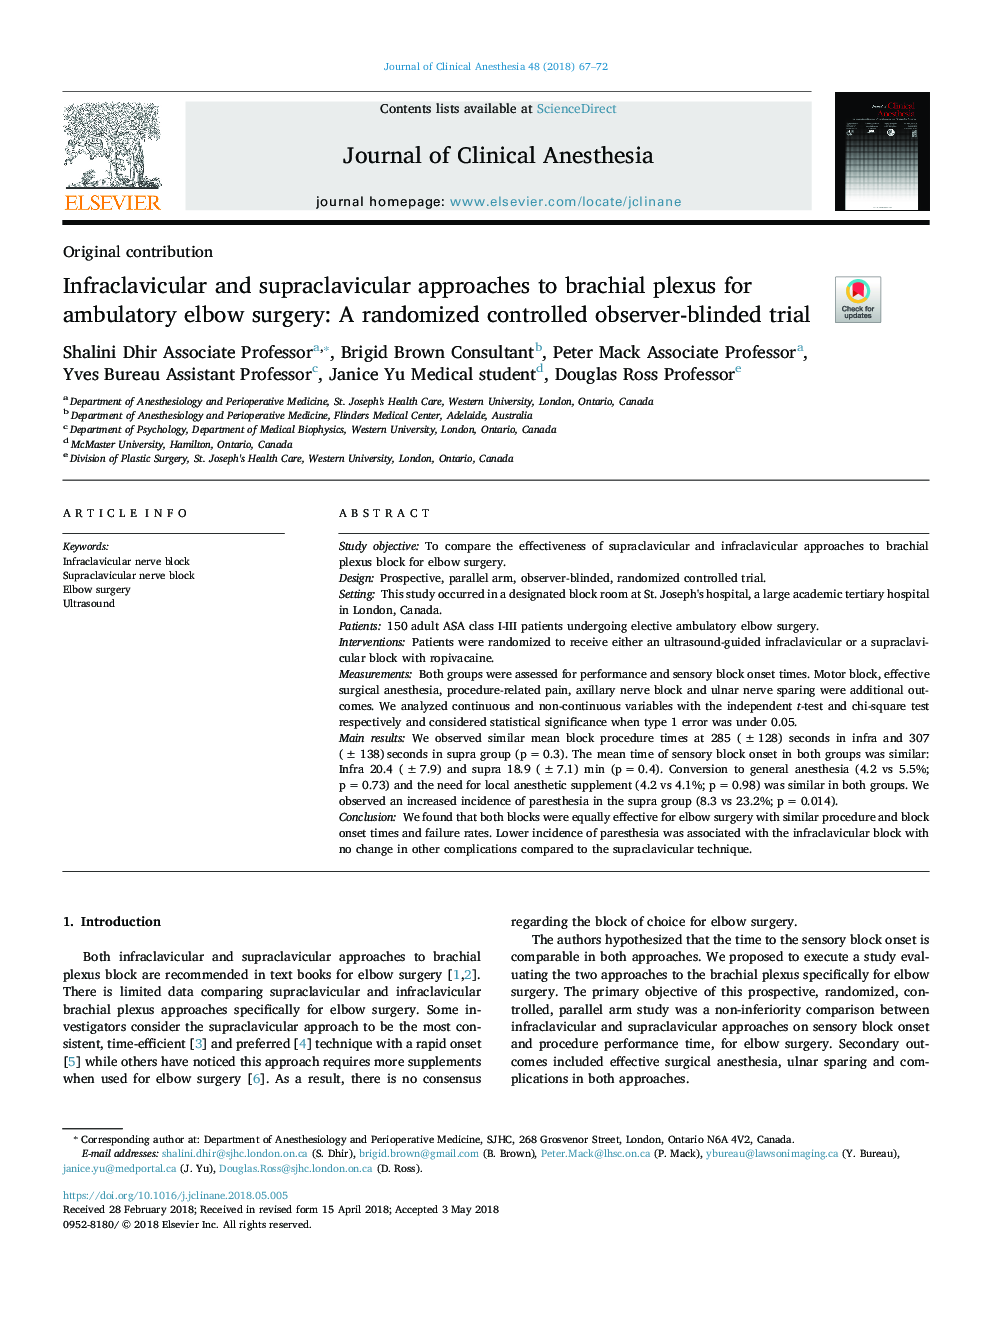 Infraclavicular and supraclavicular approaches to brachial plexus for ambulatory elbow surgery: A randomized controlled observer-blinded trial